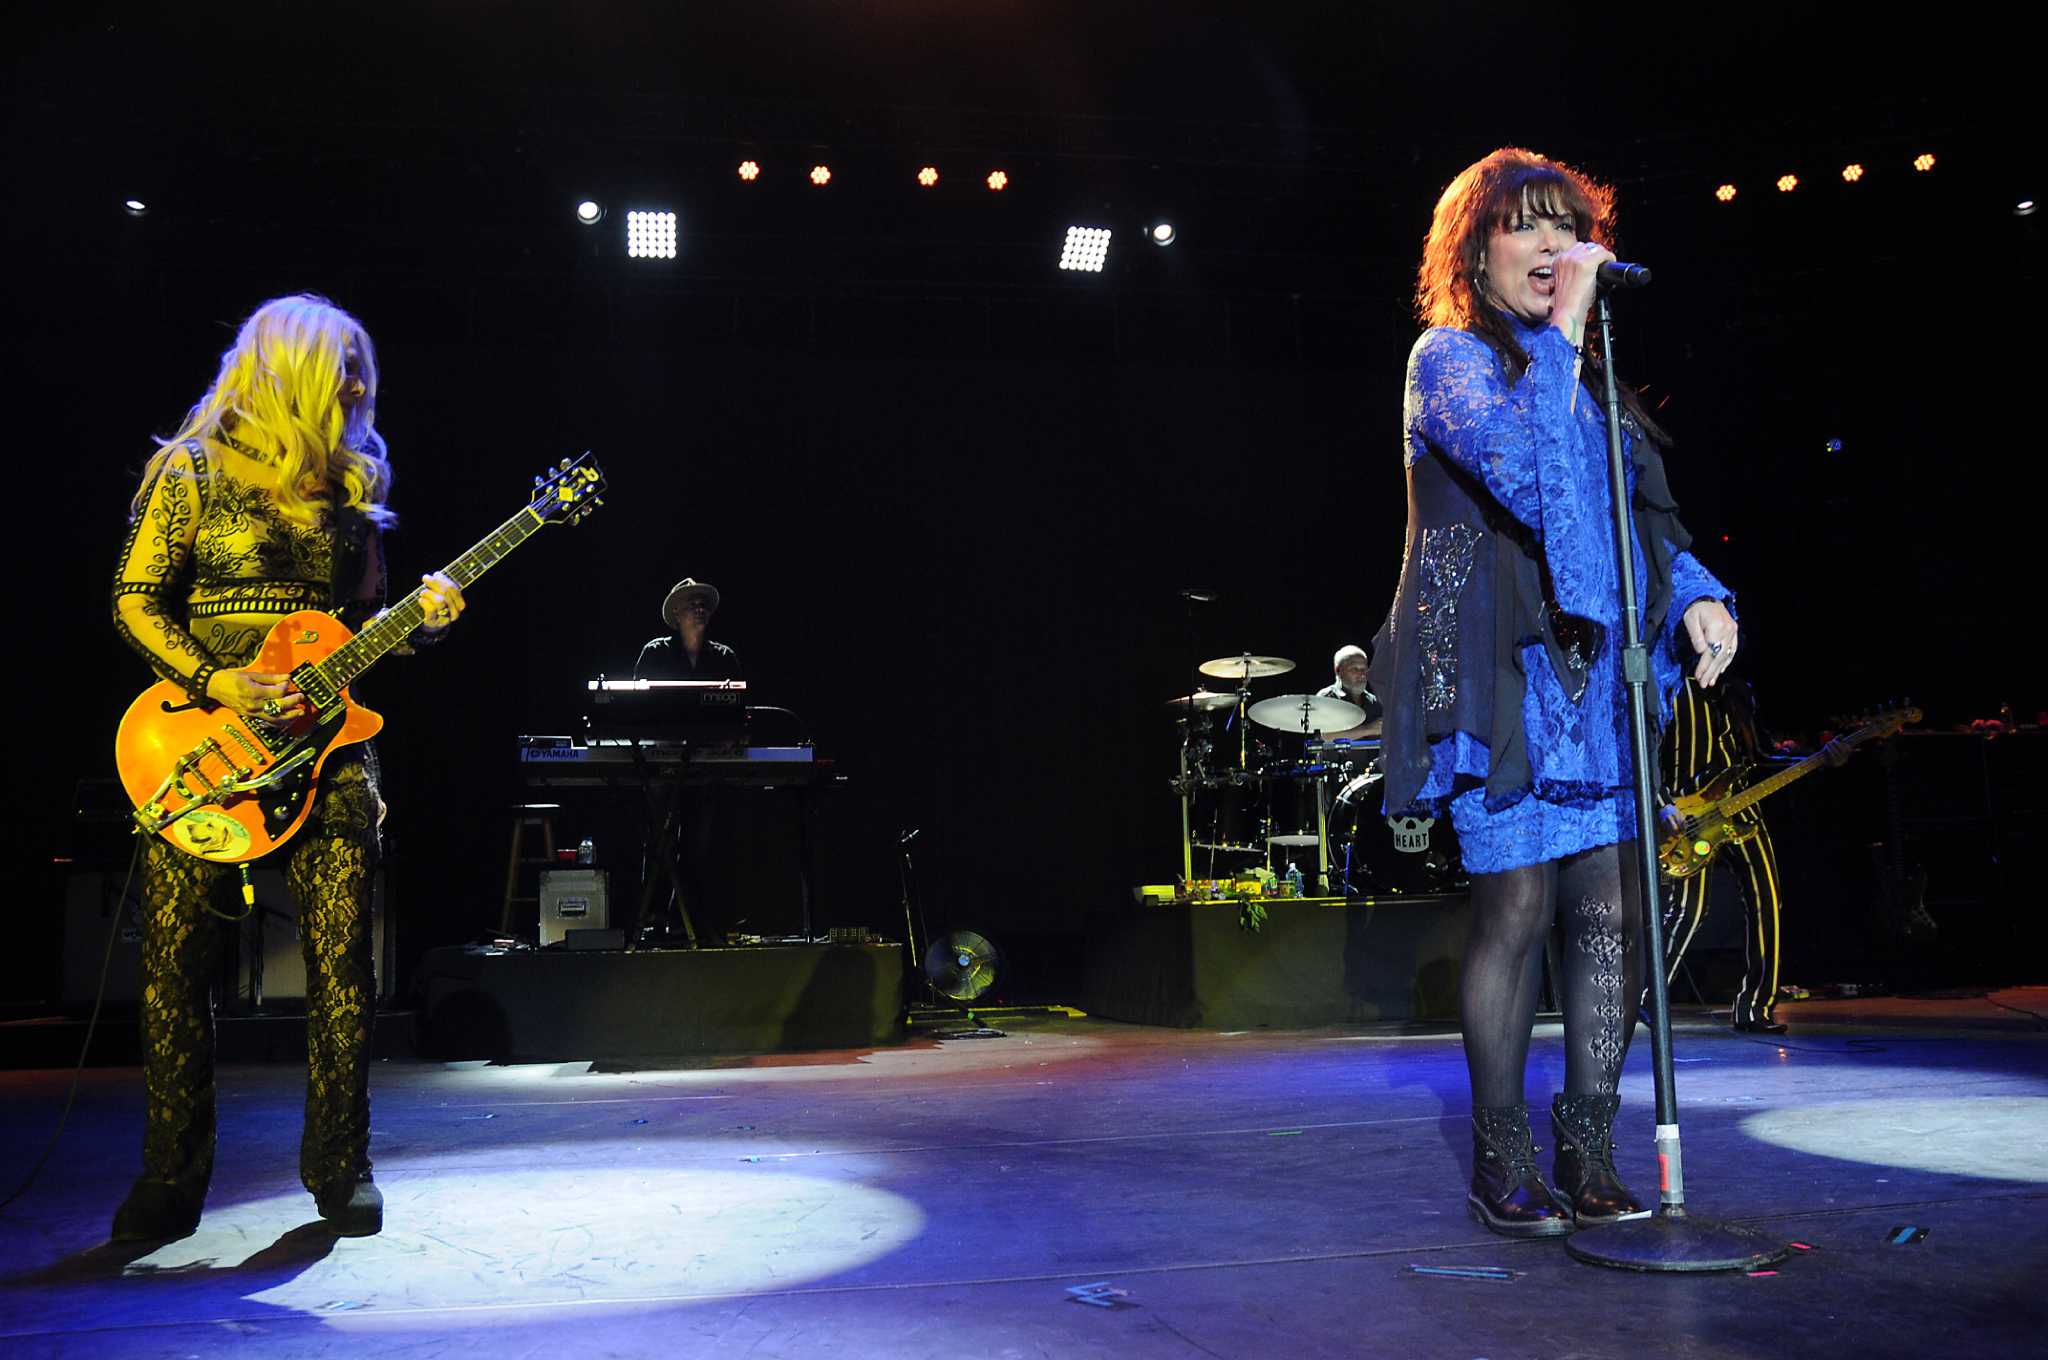 Rock band Heart returns to the road after three years with Love Alive tour